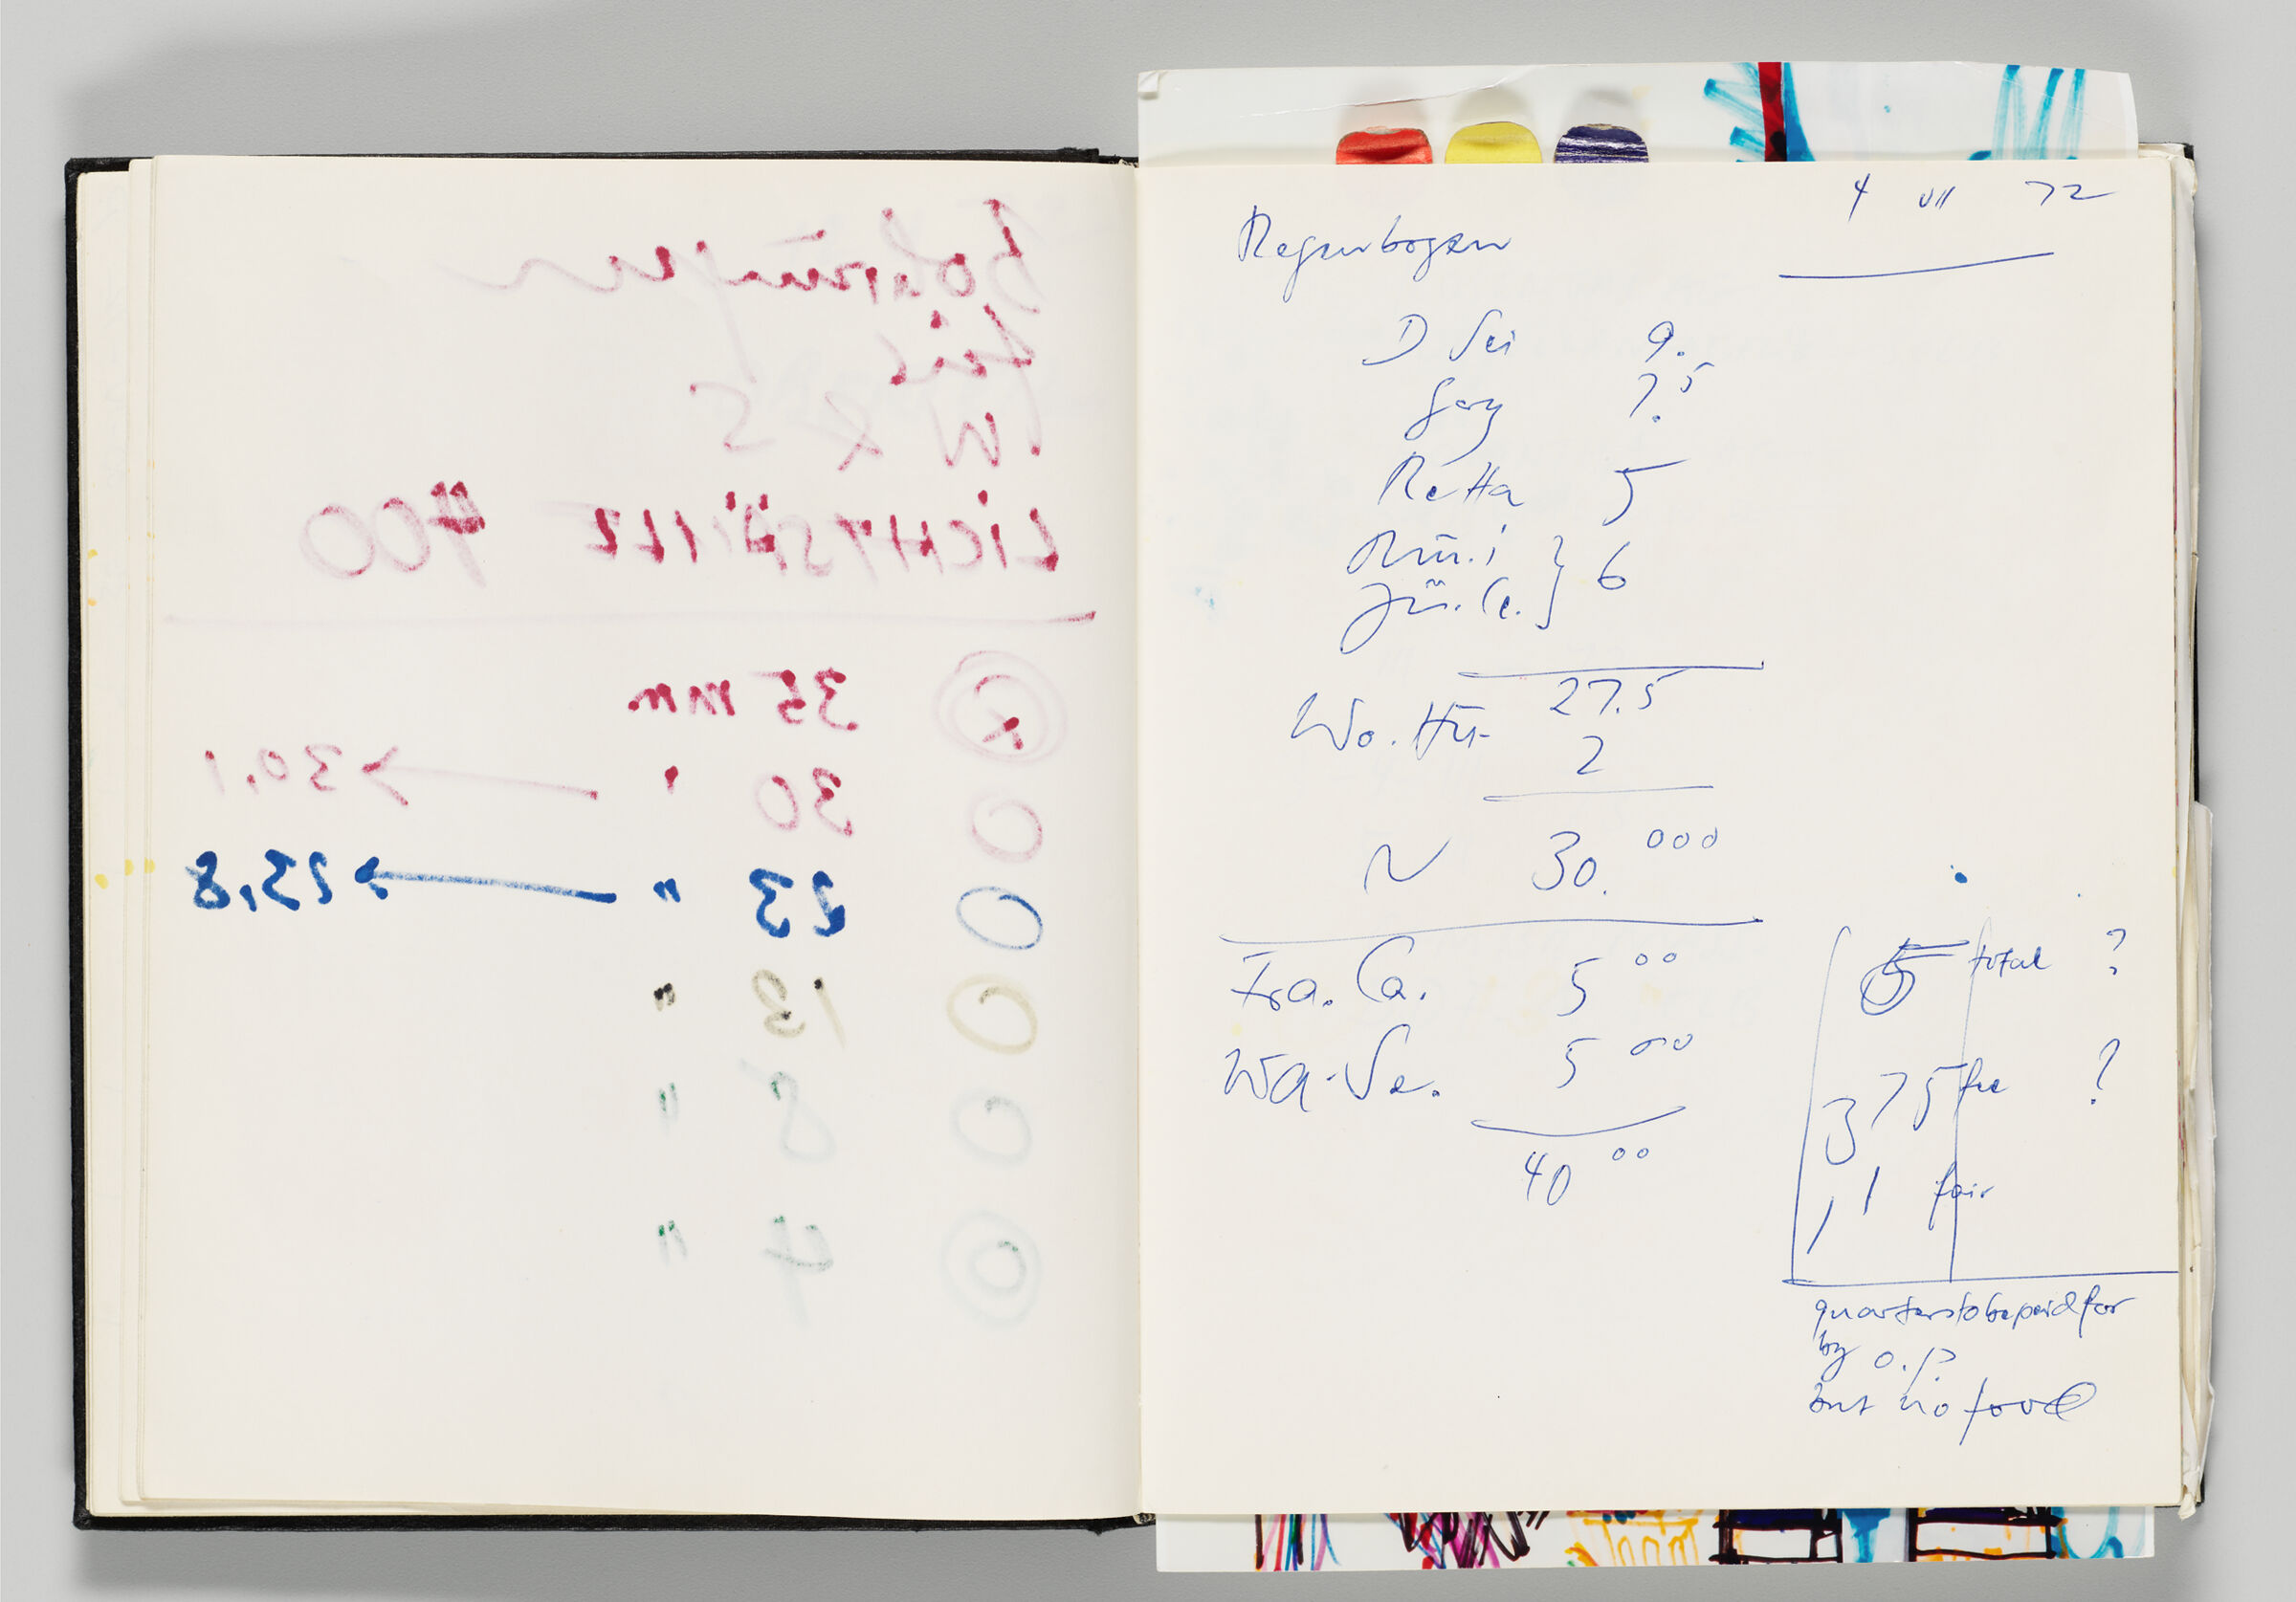 Untitled (Bleed-Through Of Previous Page, Left Page); Untitled (Notes On Rainbow Mural, Right Page)